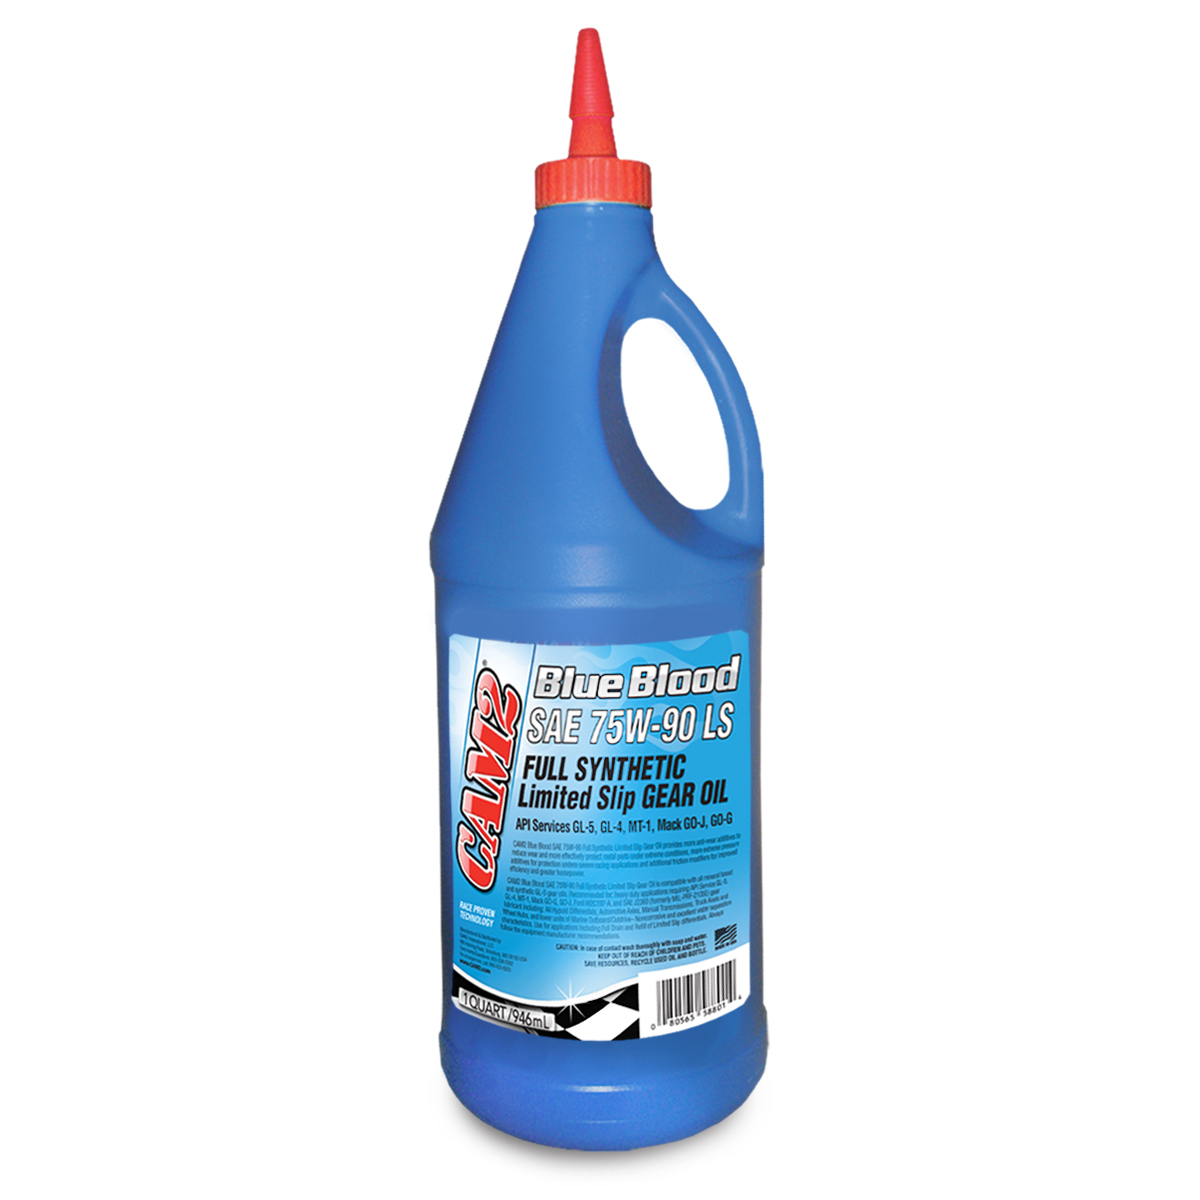 CAM2 BLUE BLOOD SAE 75W-90 FULL SYNTHETIC LS GEAR OIL GL-5 80565-588